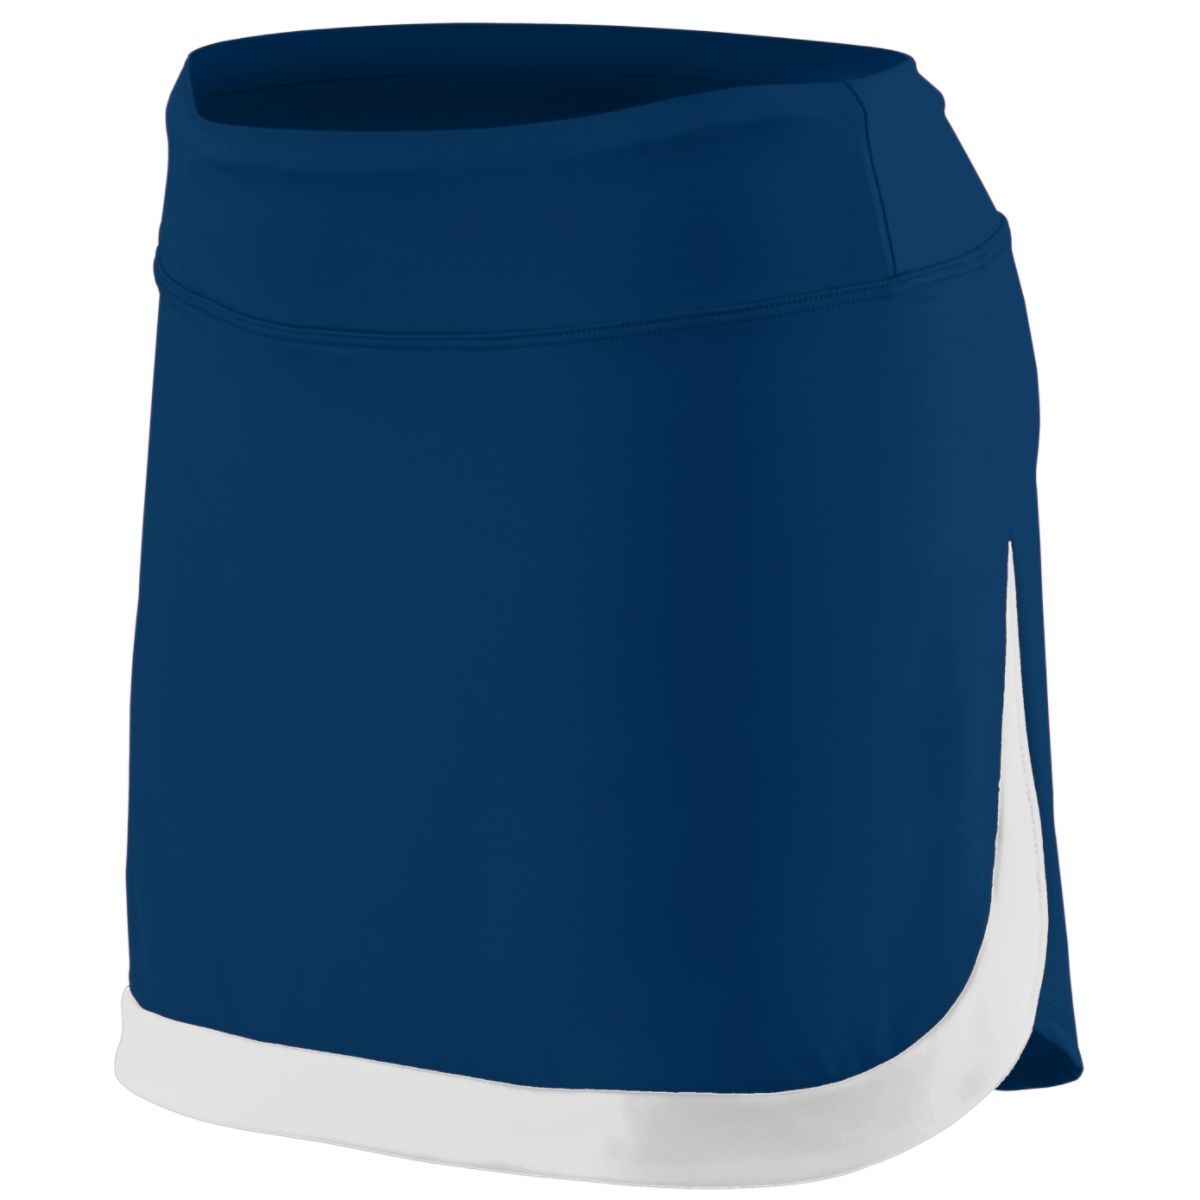 Augusta Sportswear Girls Action Color Block Skort in Navy/White  -Part of the Girls, Augusta-Products product lines at KanaleyCreations.com